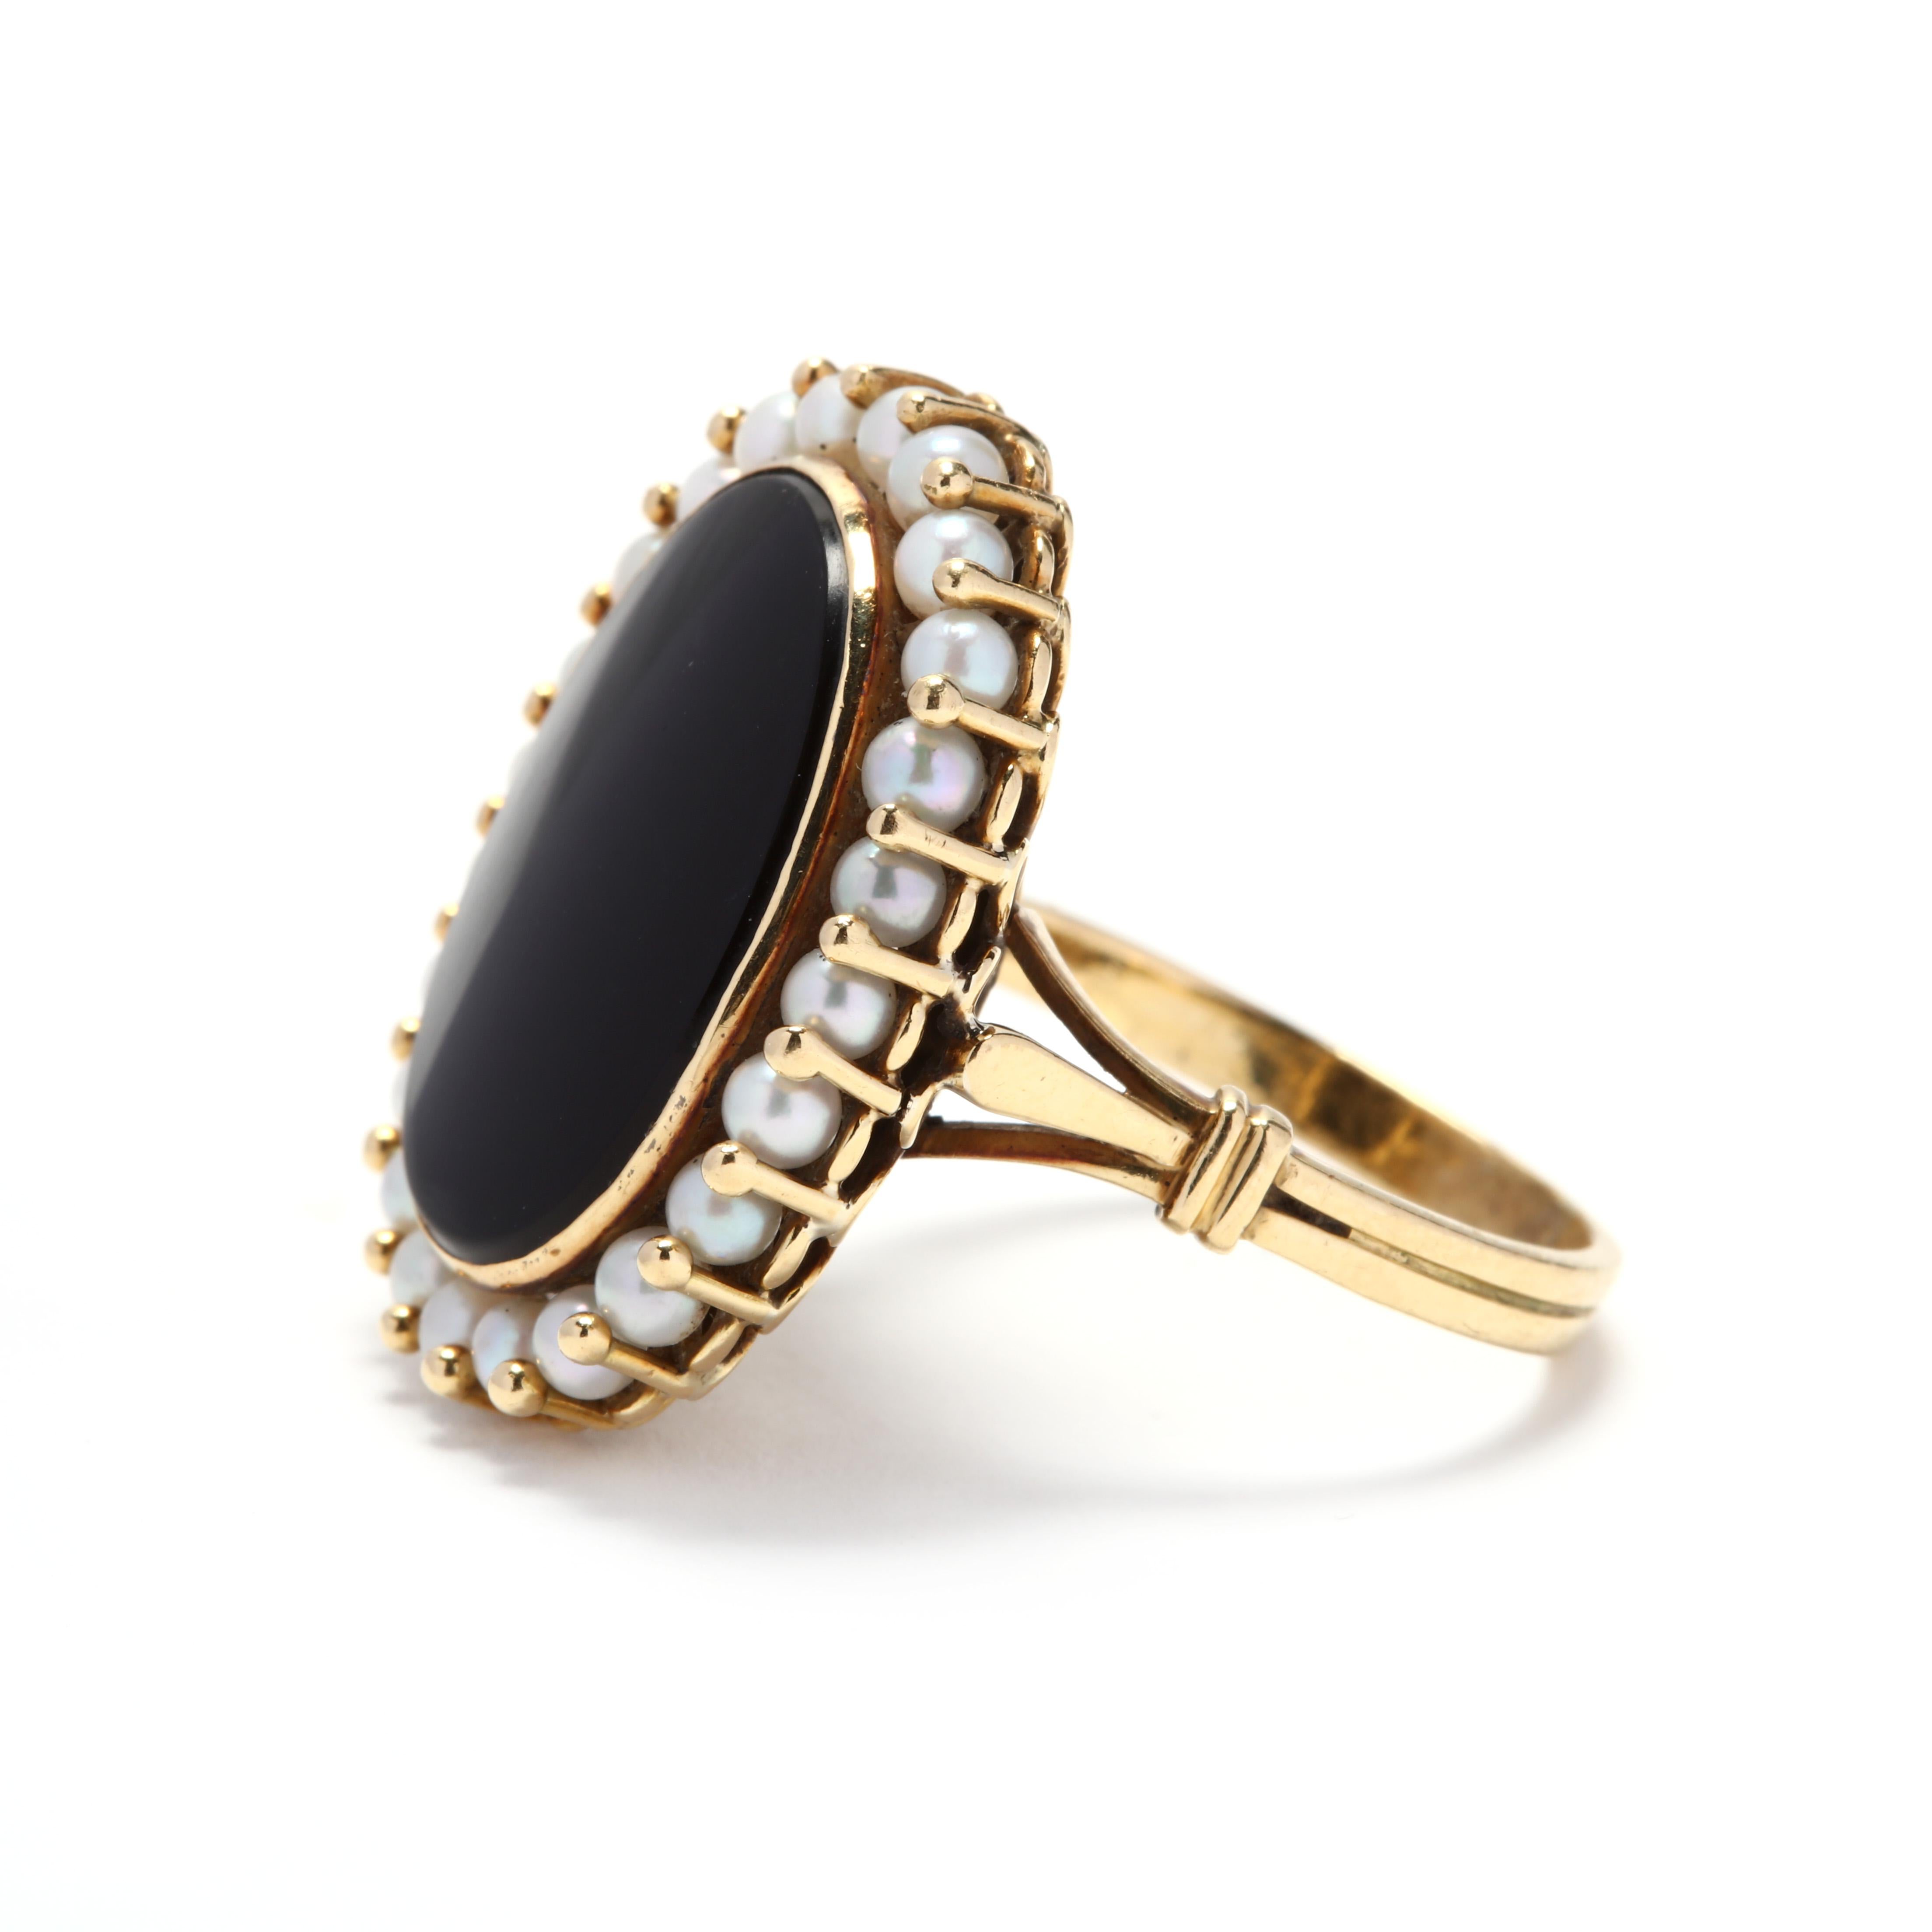 Oval Cut Vintage 18 Karat Gold, Black Onyx and Pearl Ring